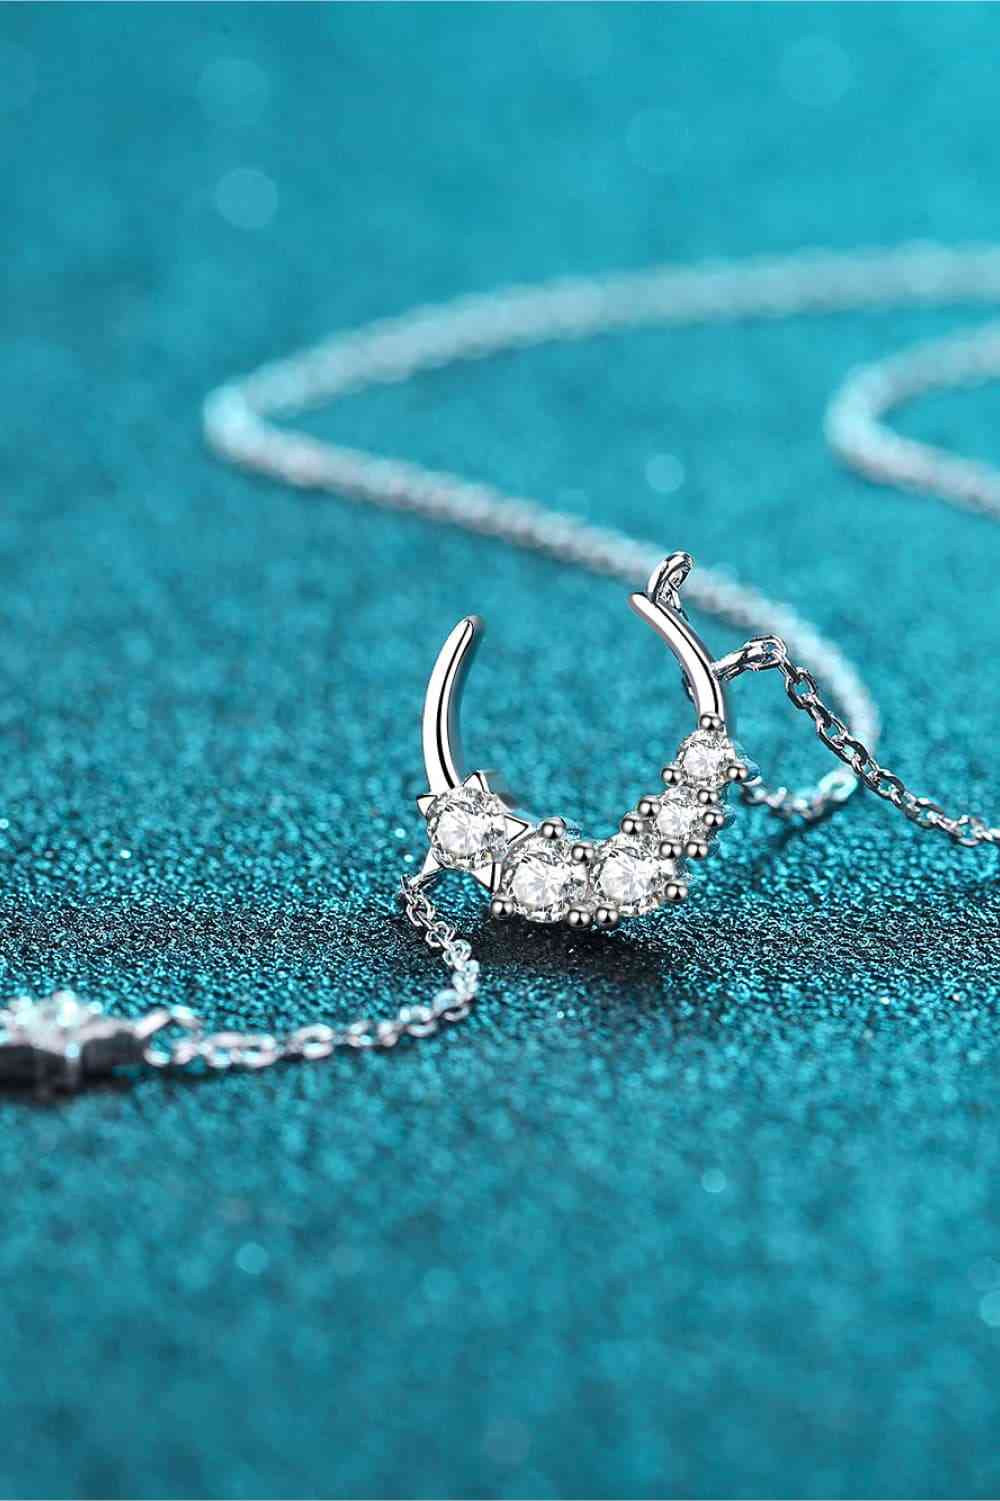 Star & Moon Moissanite Necklace - EMMY